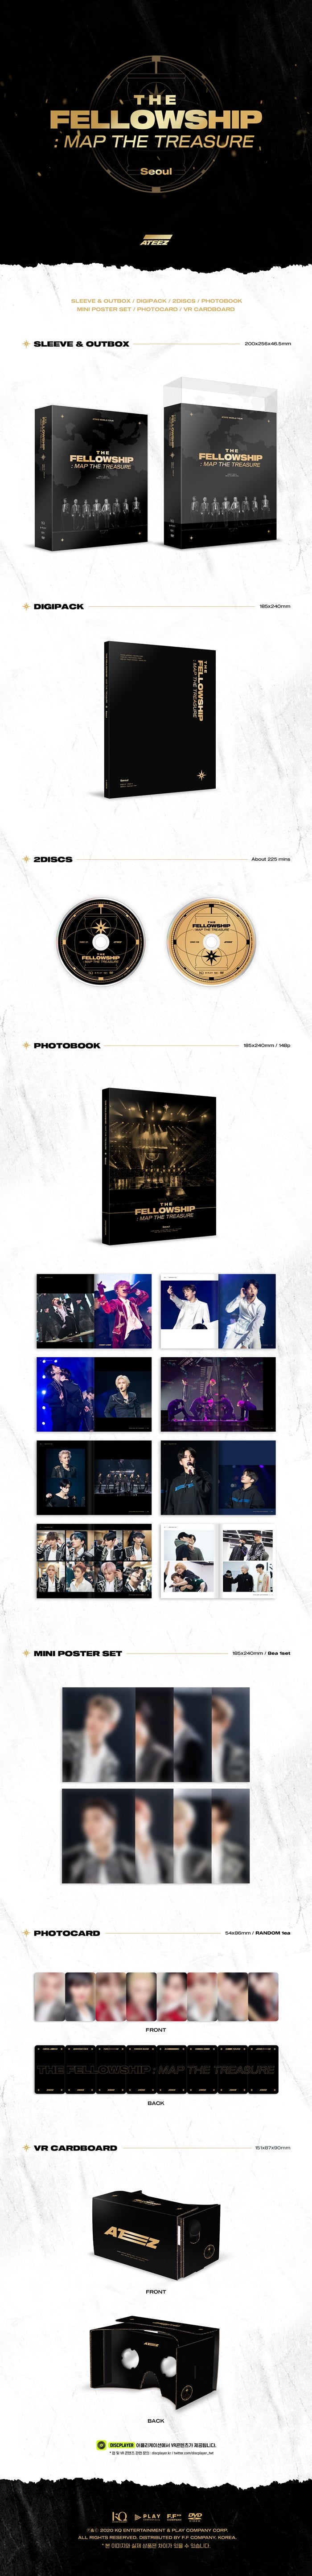 ATEEZ WORLD TOUR THE FELLOWSHIP : MAP THE TREASURE SEOUL DVD Global super trending idol ATEEZ's first solo concert in Kore...